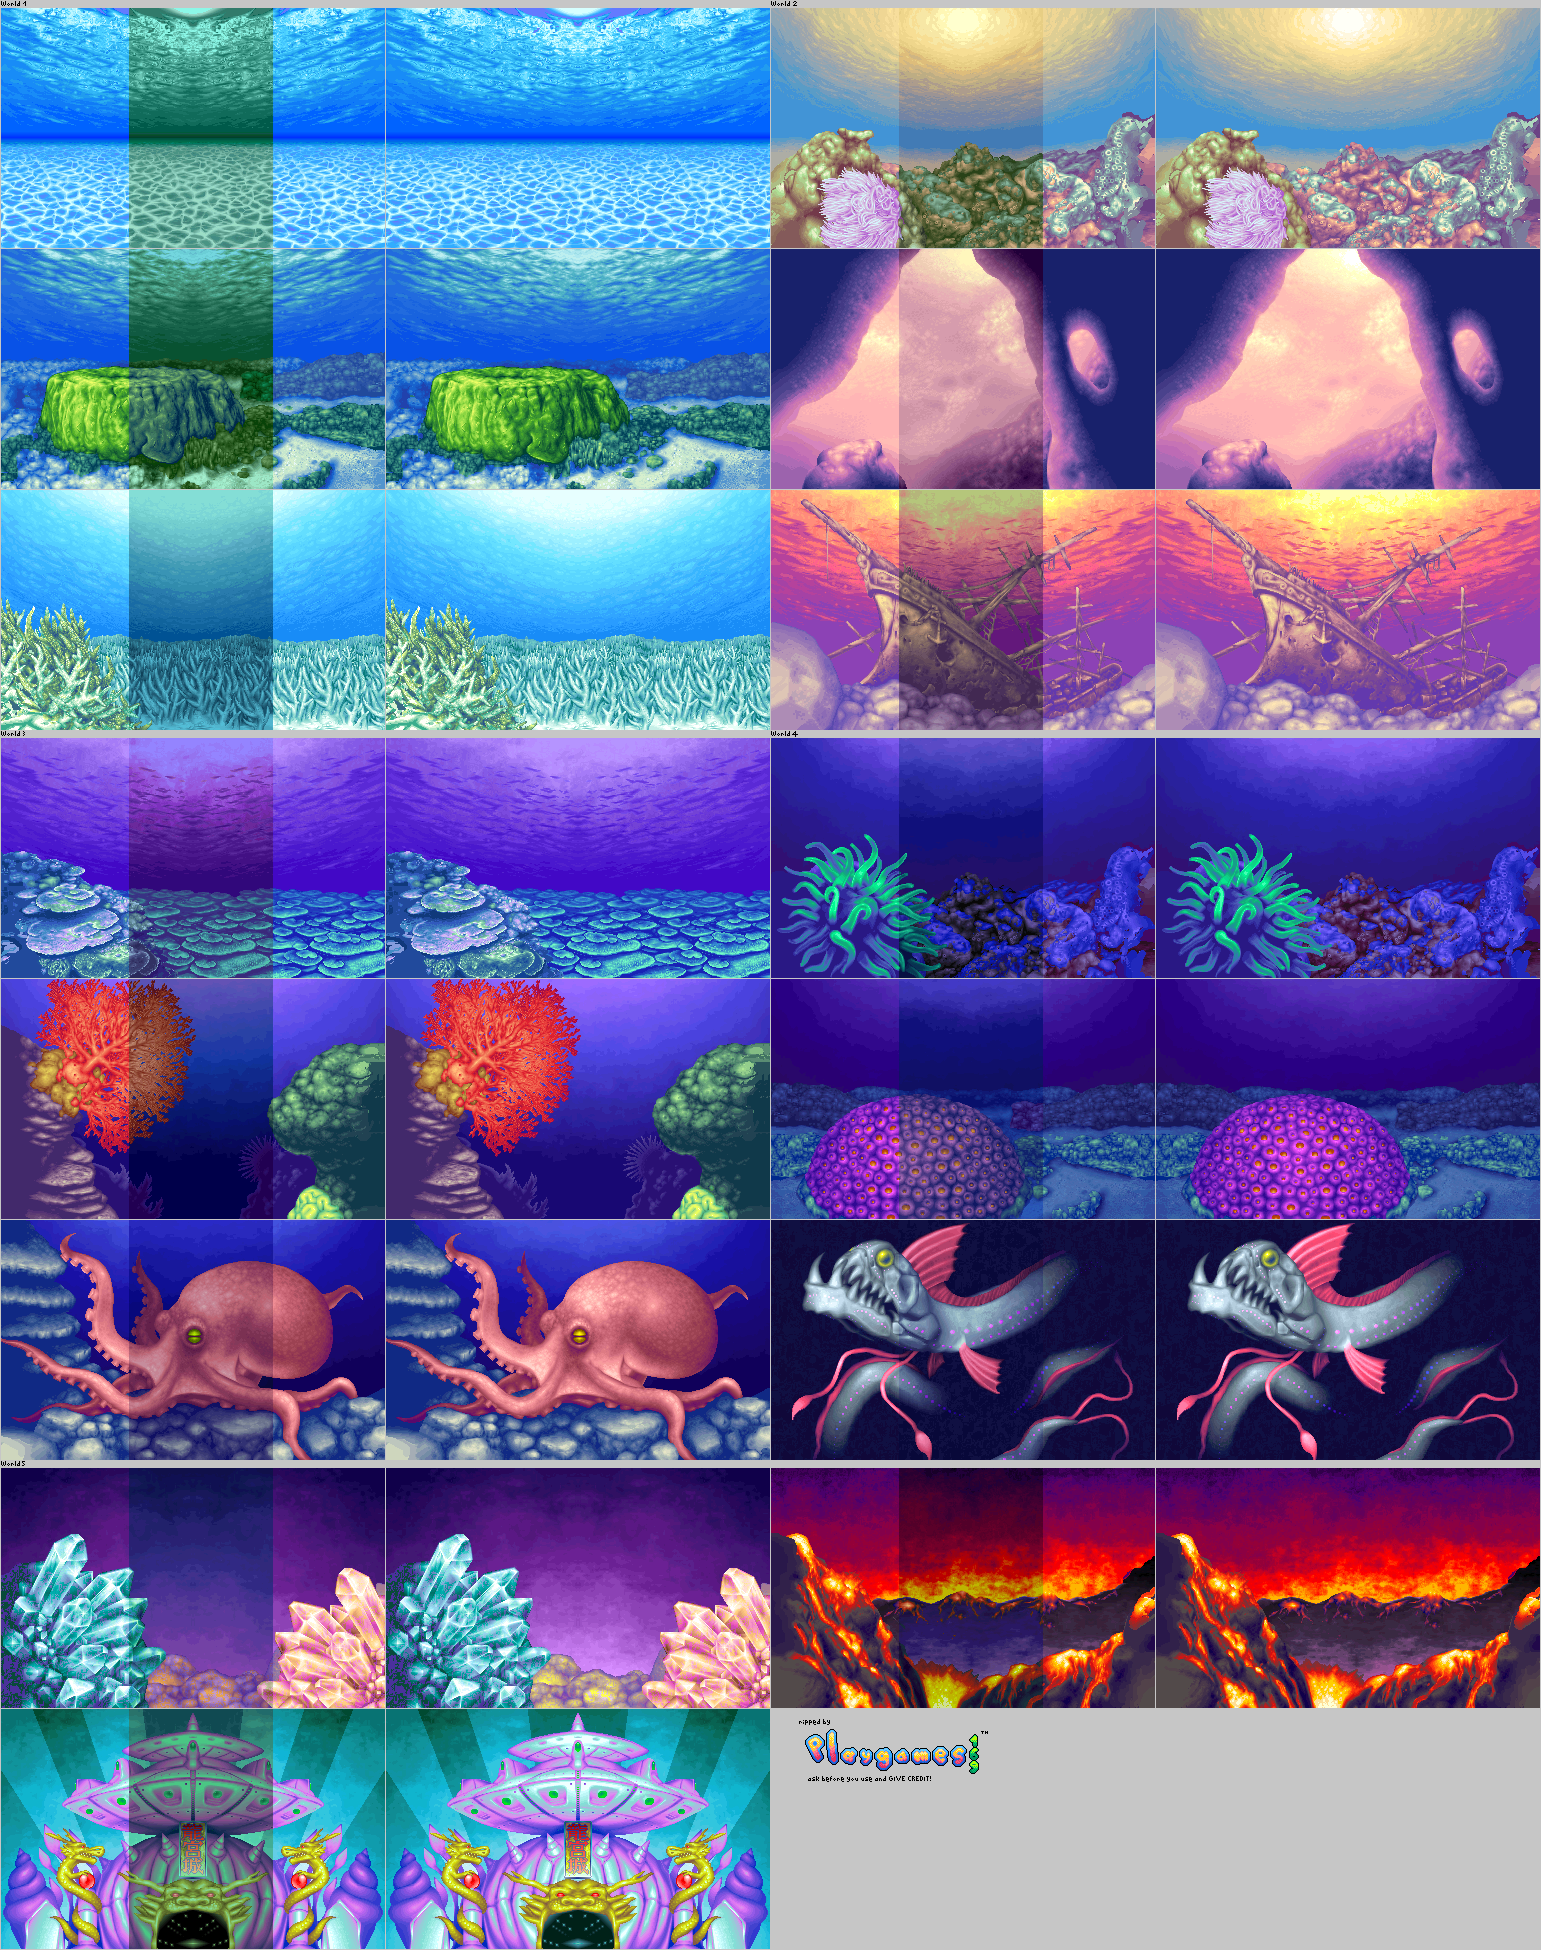 Stage Backgrounds